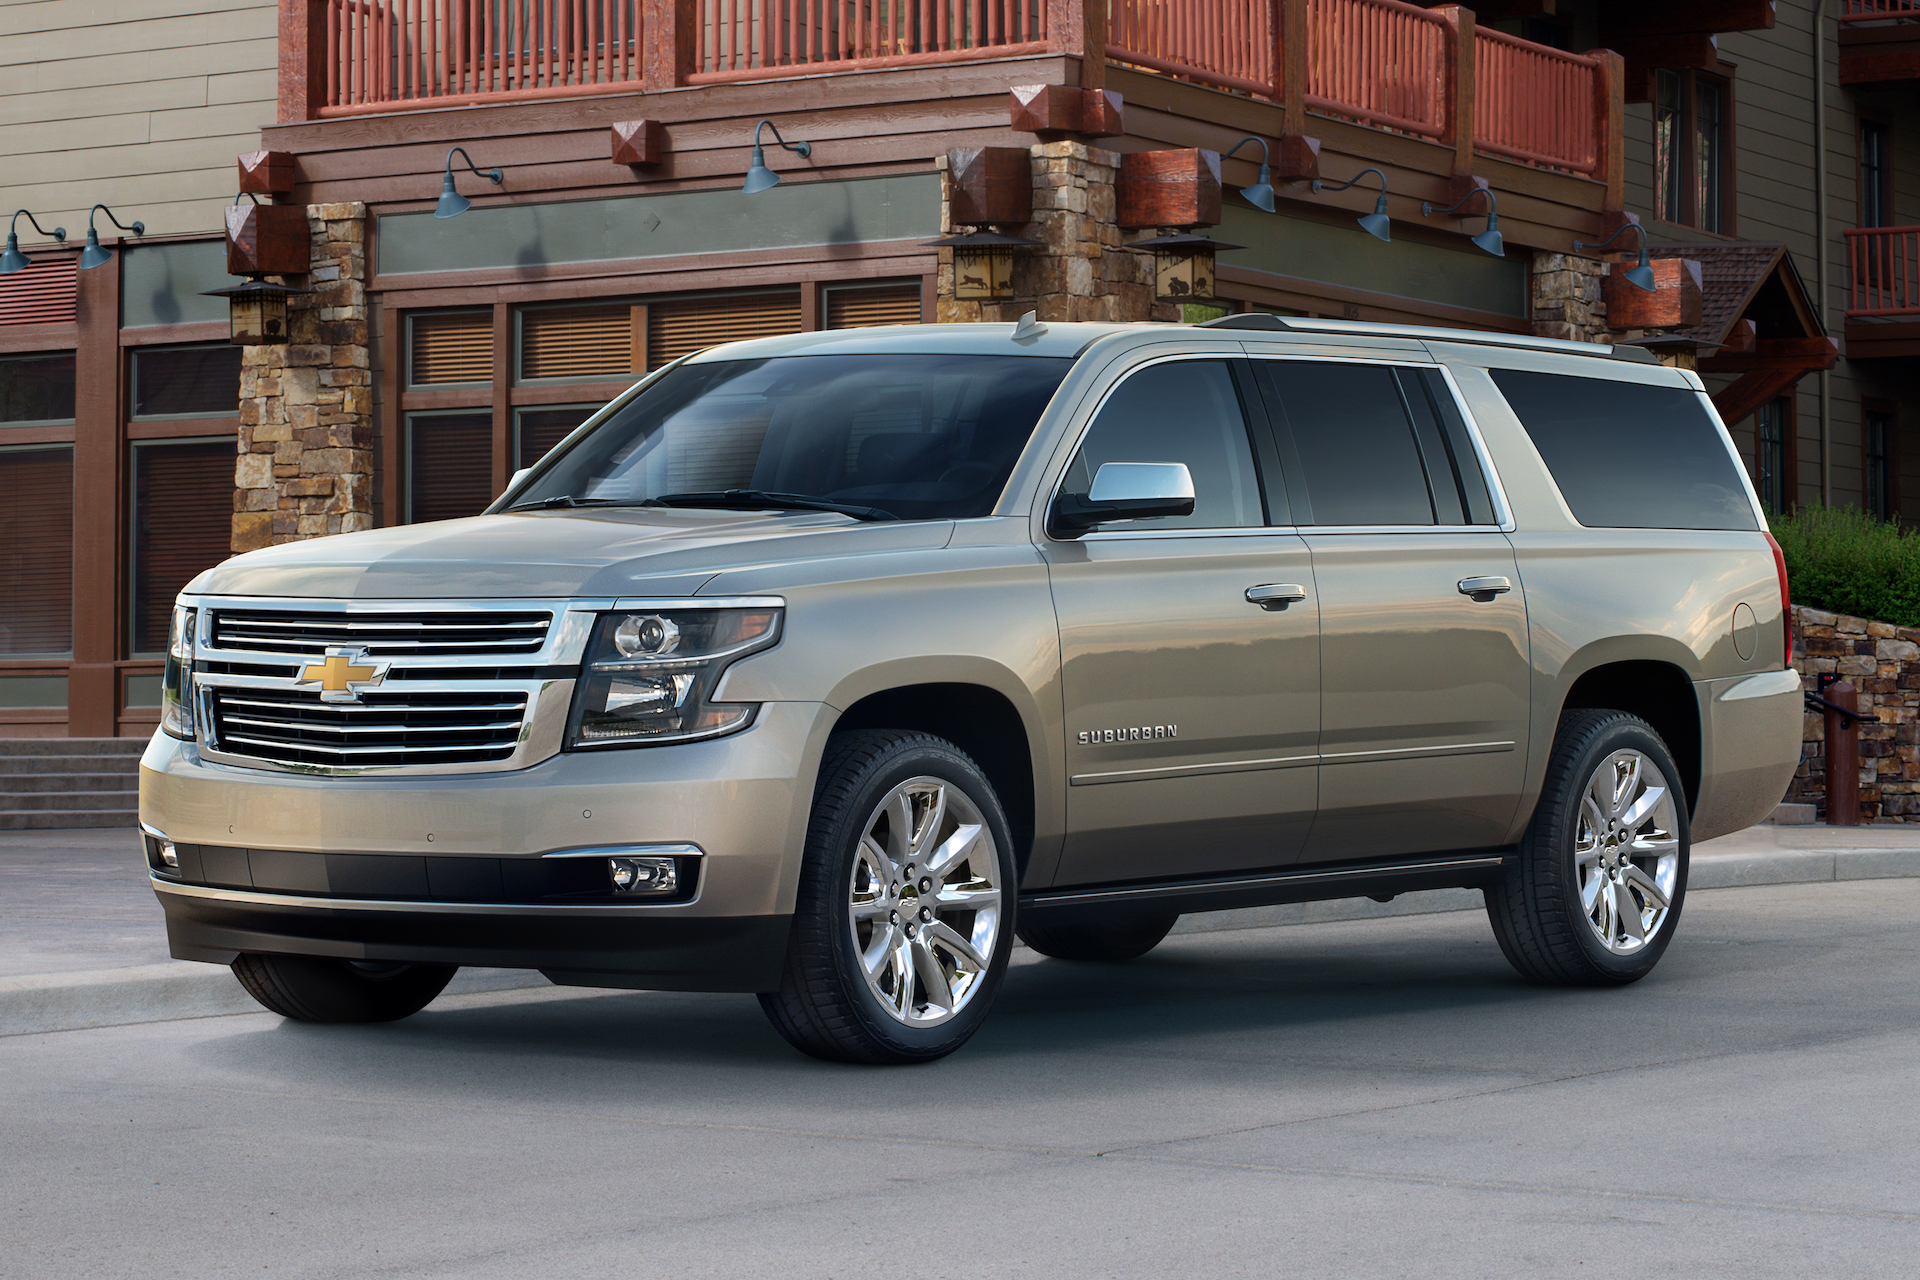 2019 Chevrolet Suburban (Chevy) Review, Ratings, Specs, Prices, and Photos  - The Car Connection